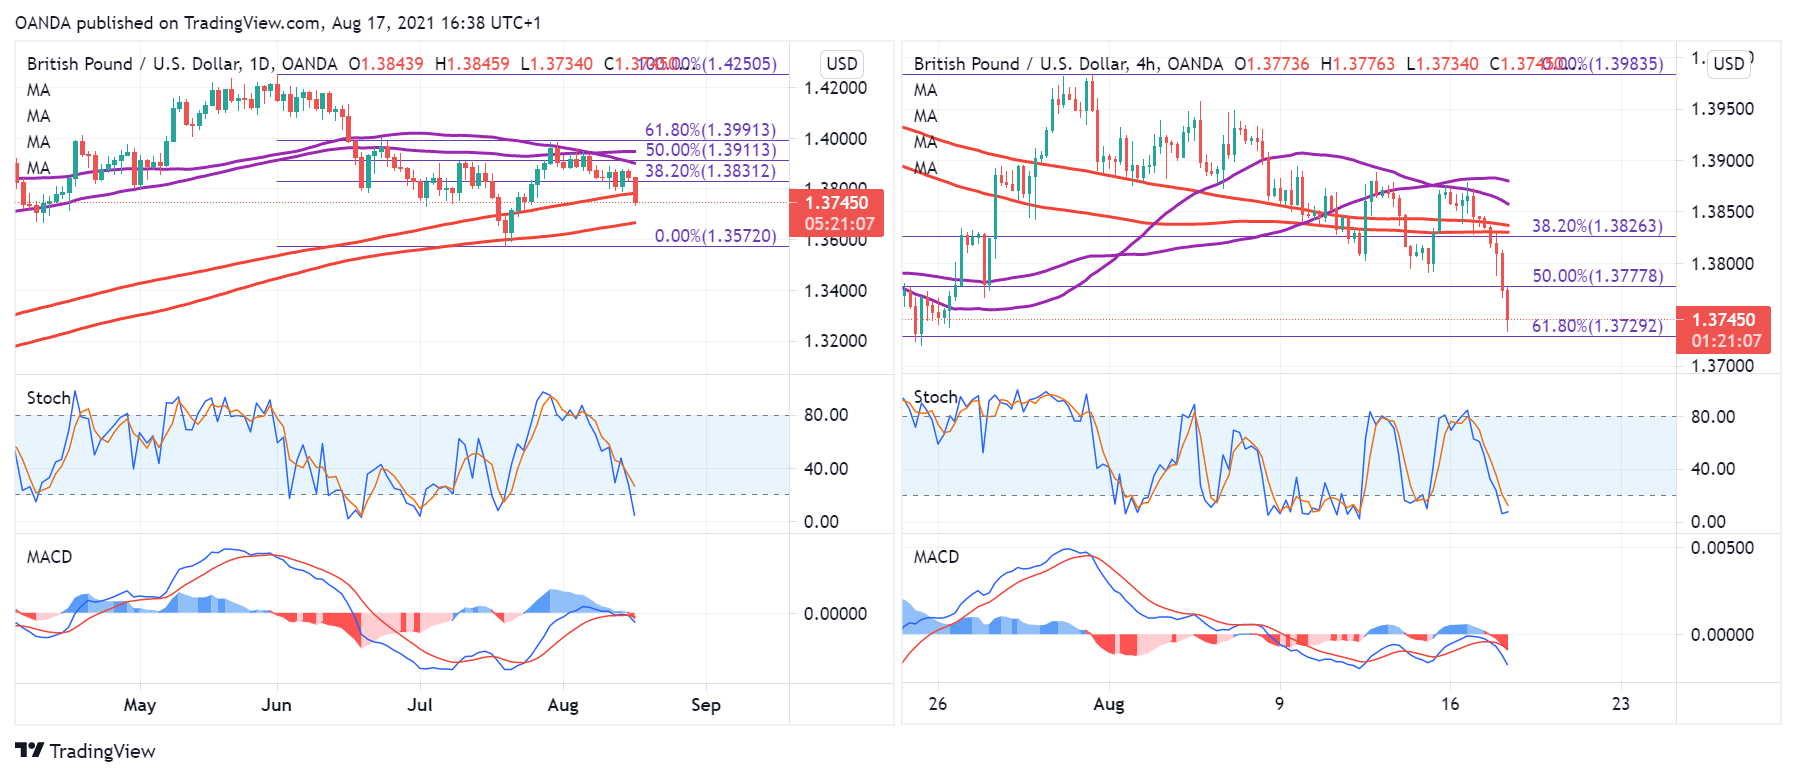 GBP/USD Daily & 4-Hr Charts